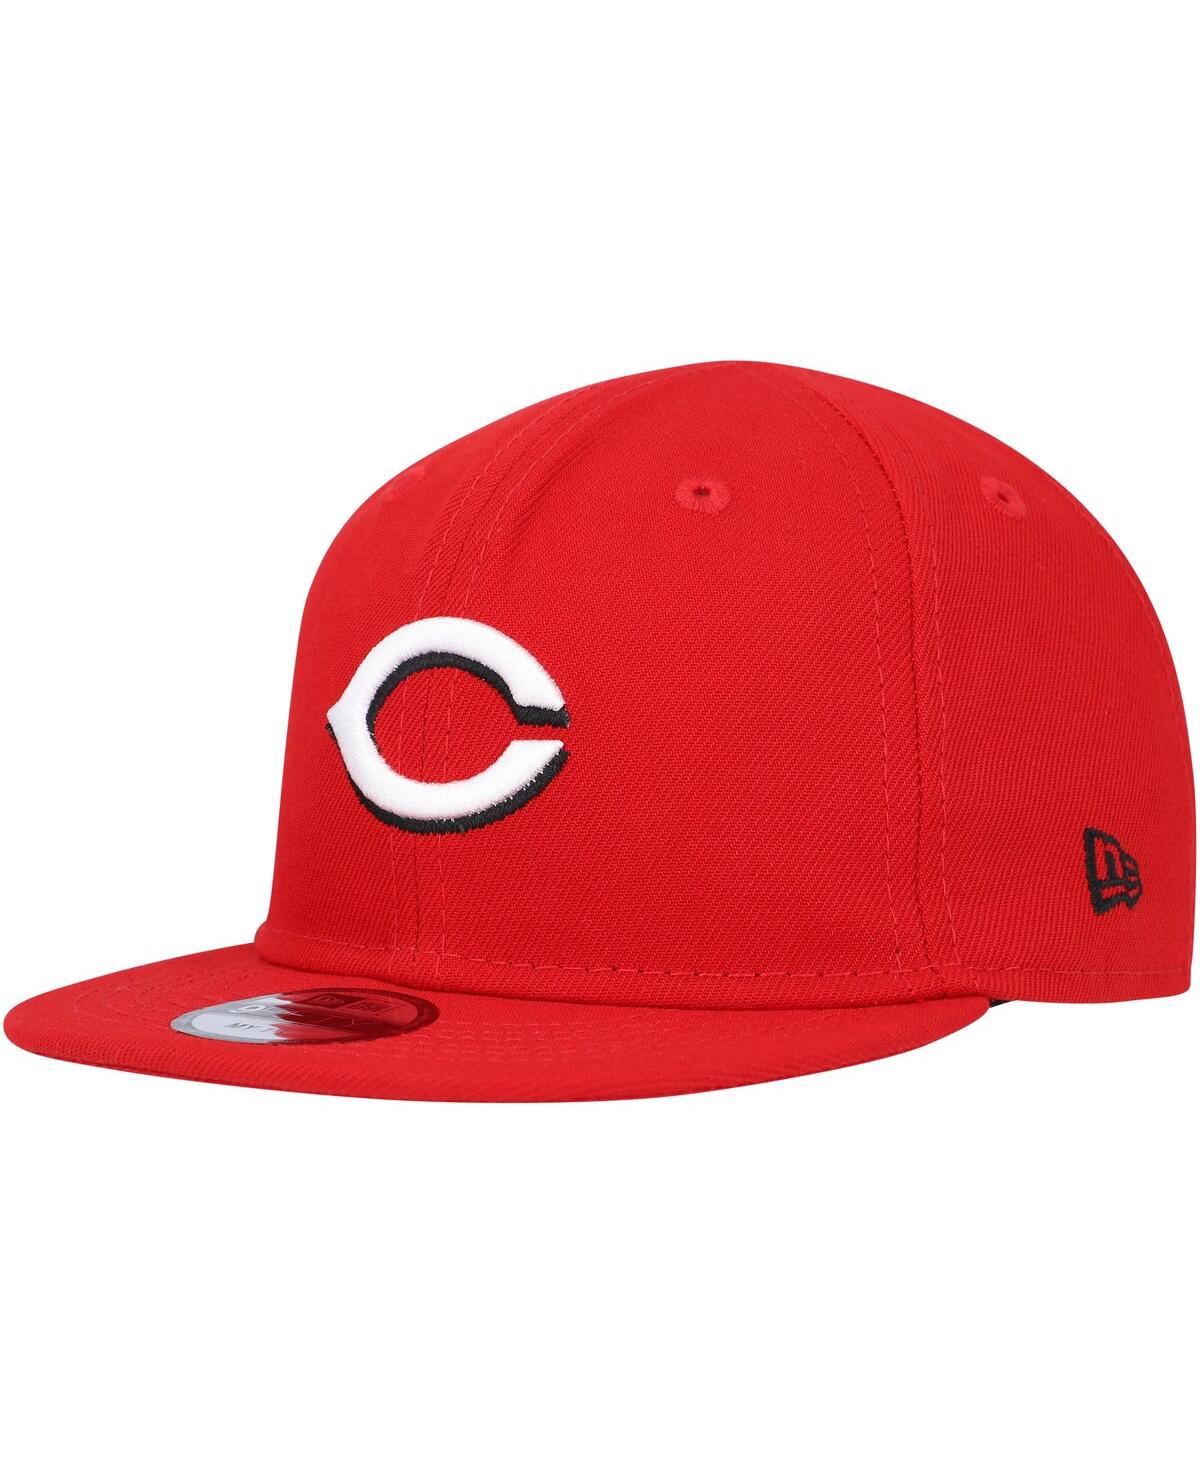 New Era Babies' Infant Boys And Girls  Red Cincinnati Reds My First 9fifty Adjustable Hat